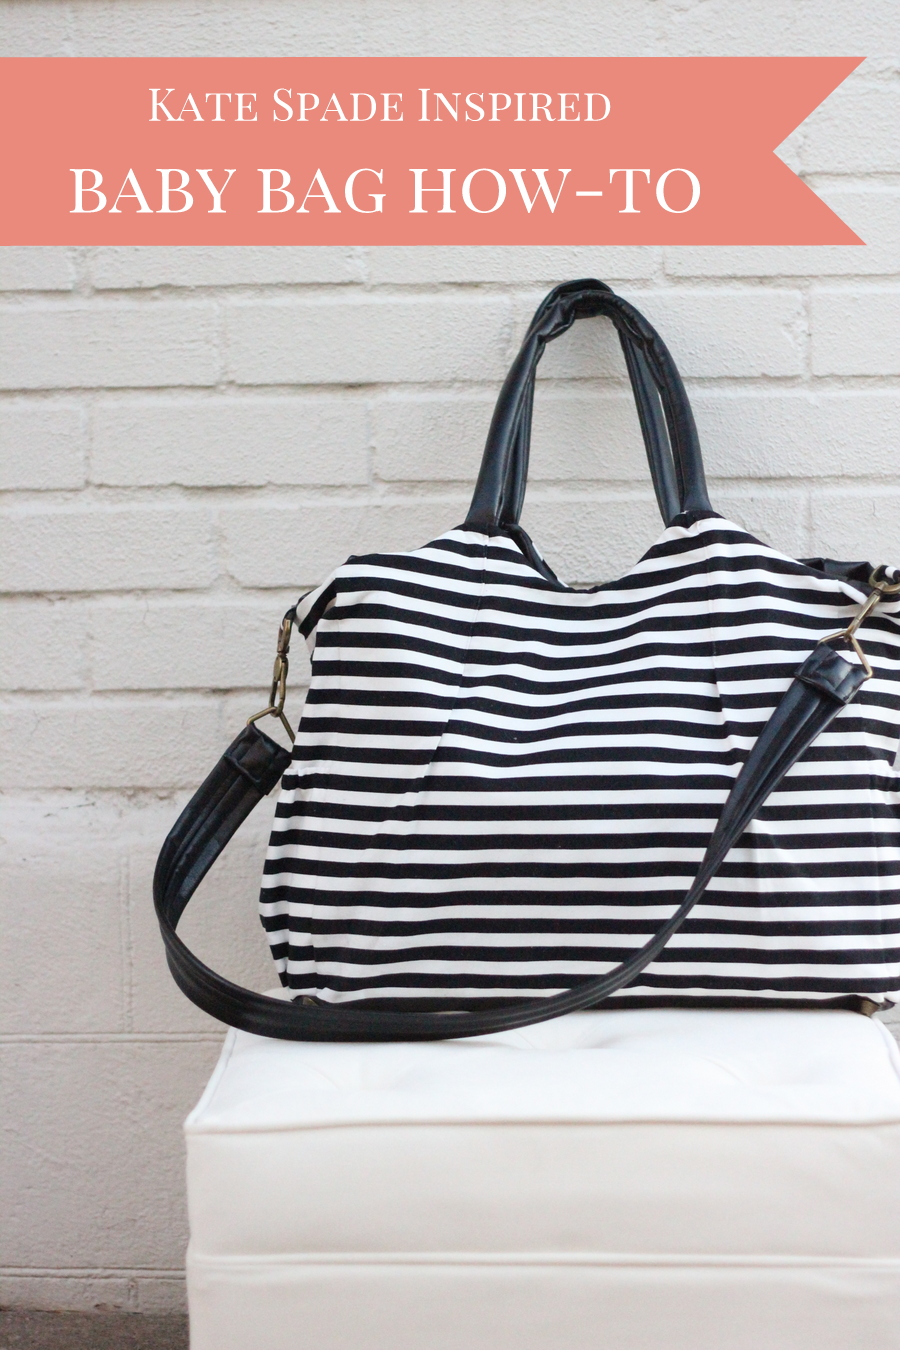 how to make a kate spade inspired diaper bag (with tons of pockets and extras, just like any good baby bag!)